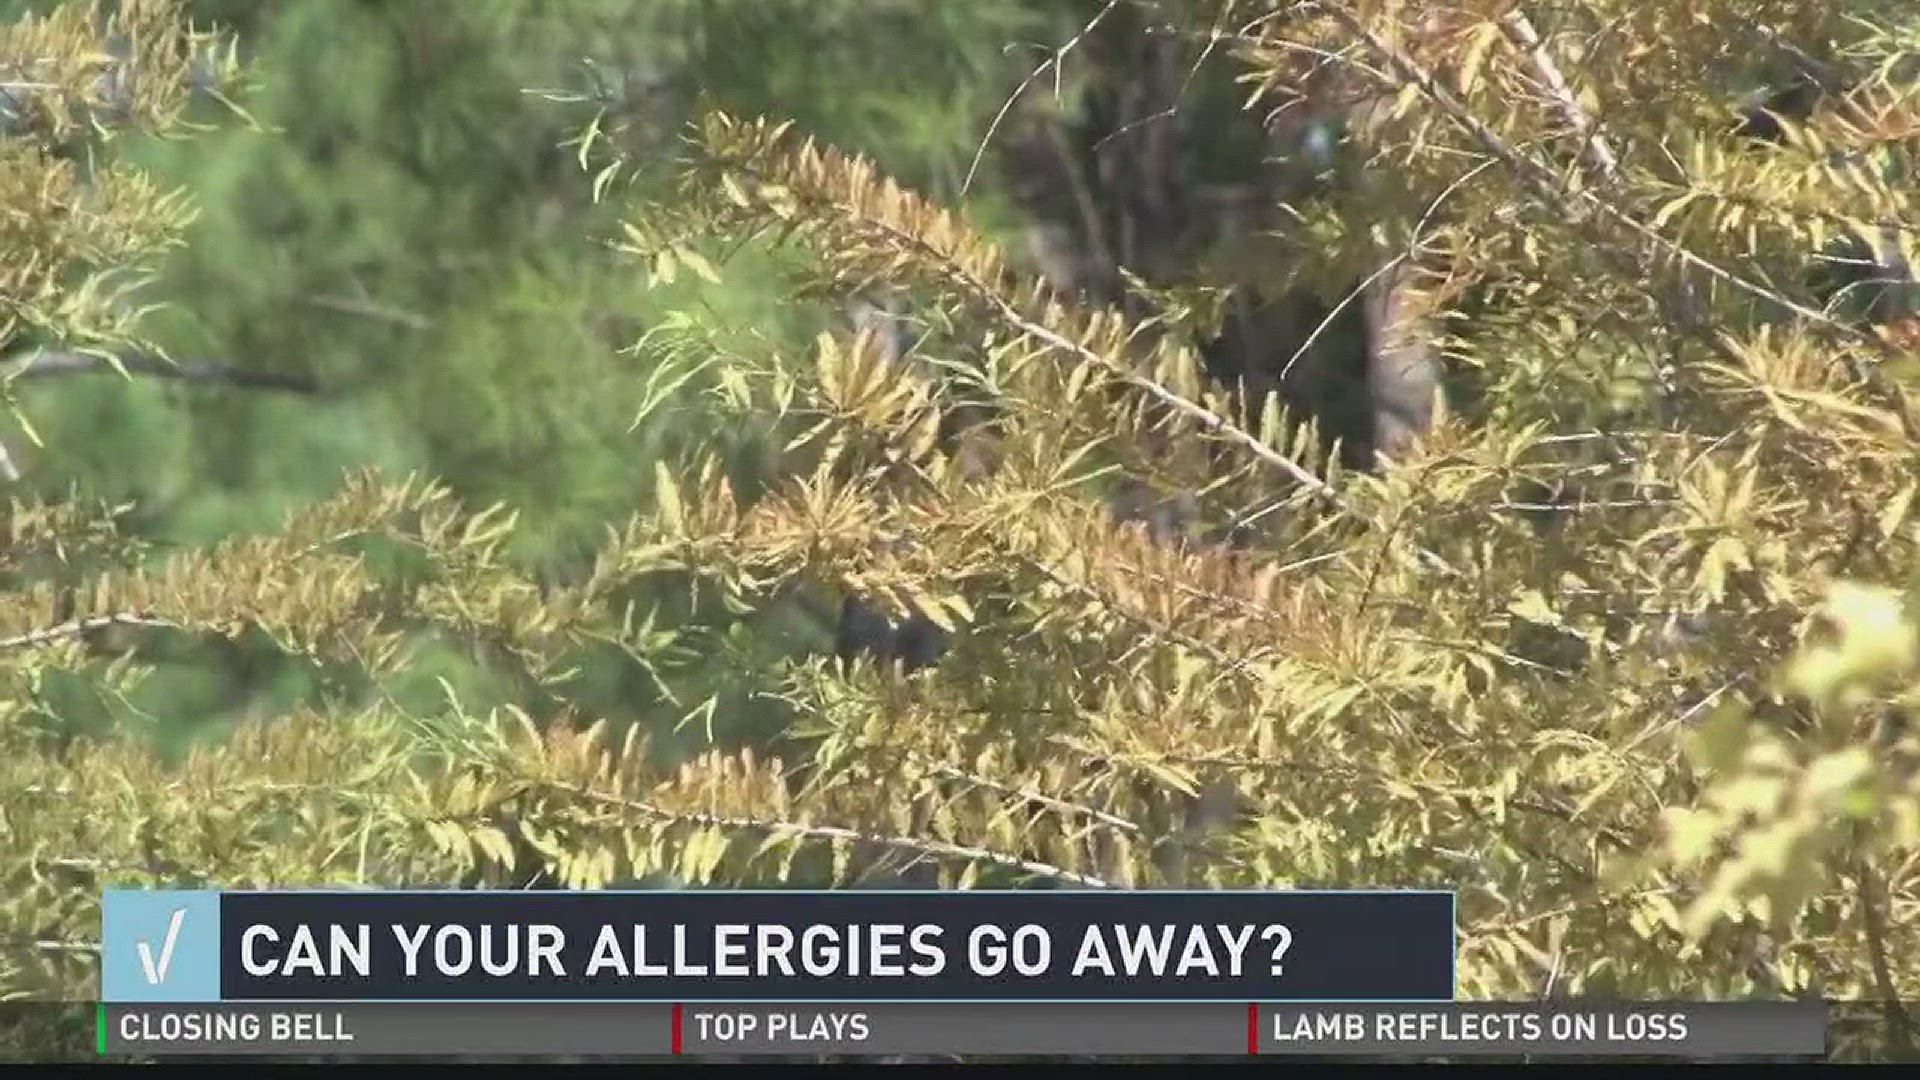 VERIFY: Can your allergies go away?